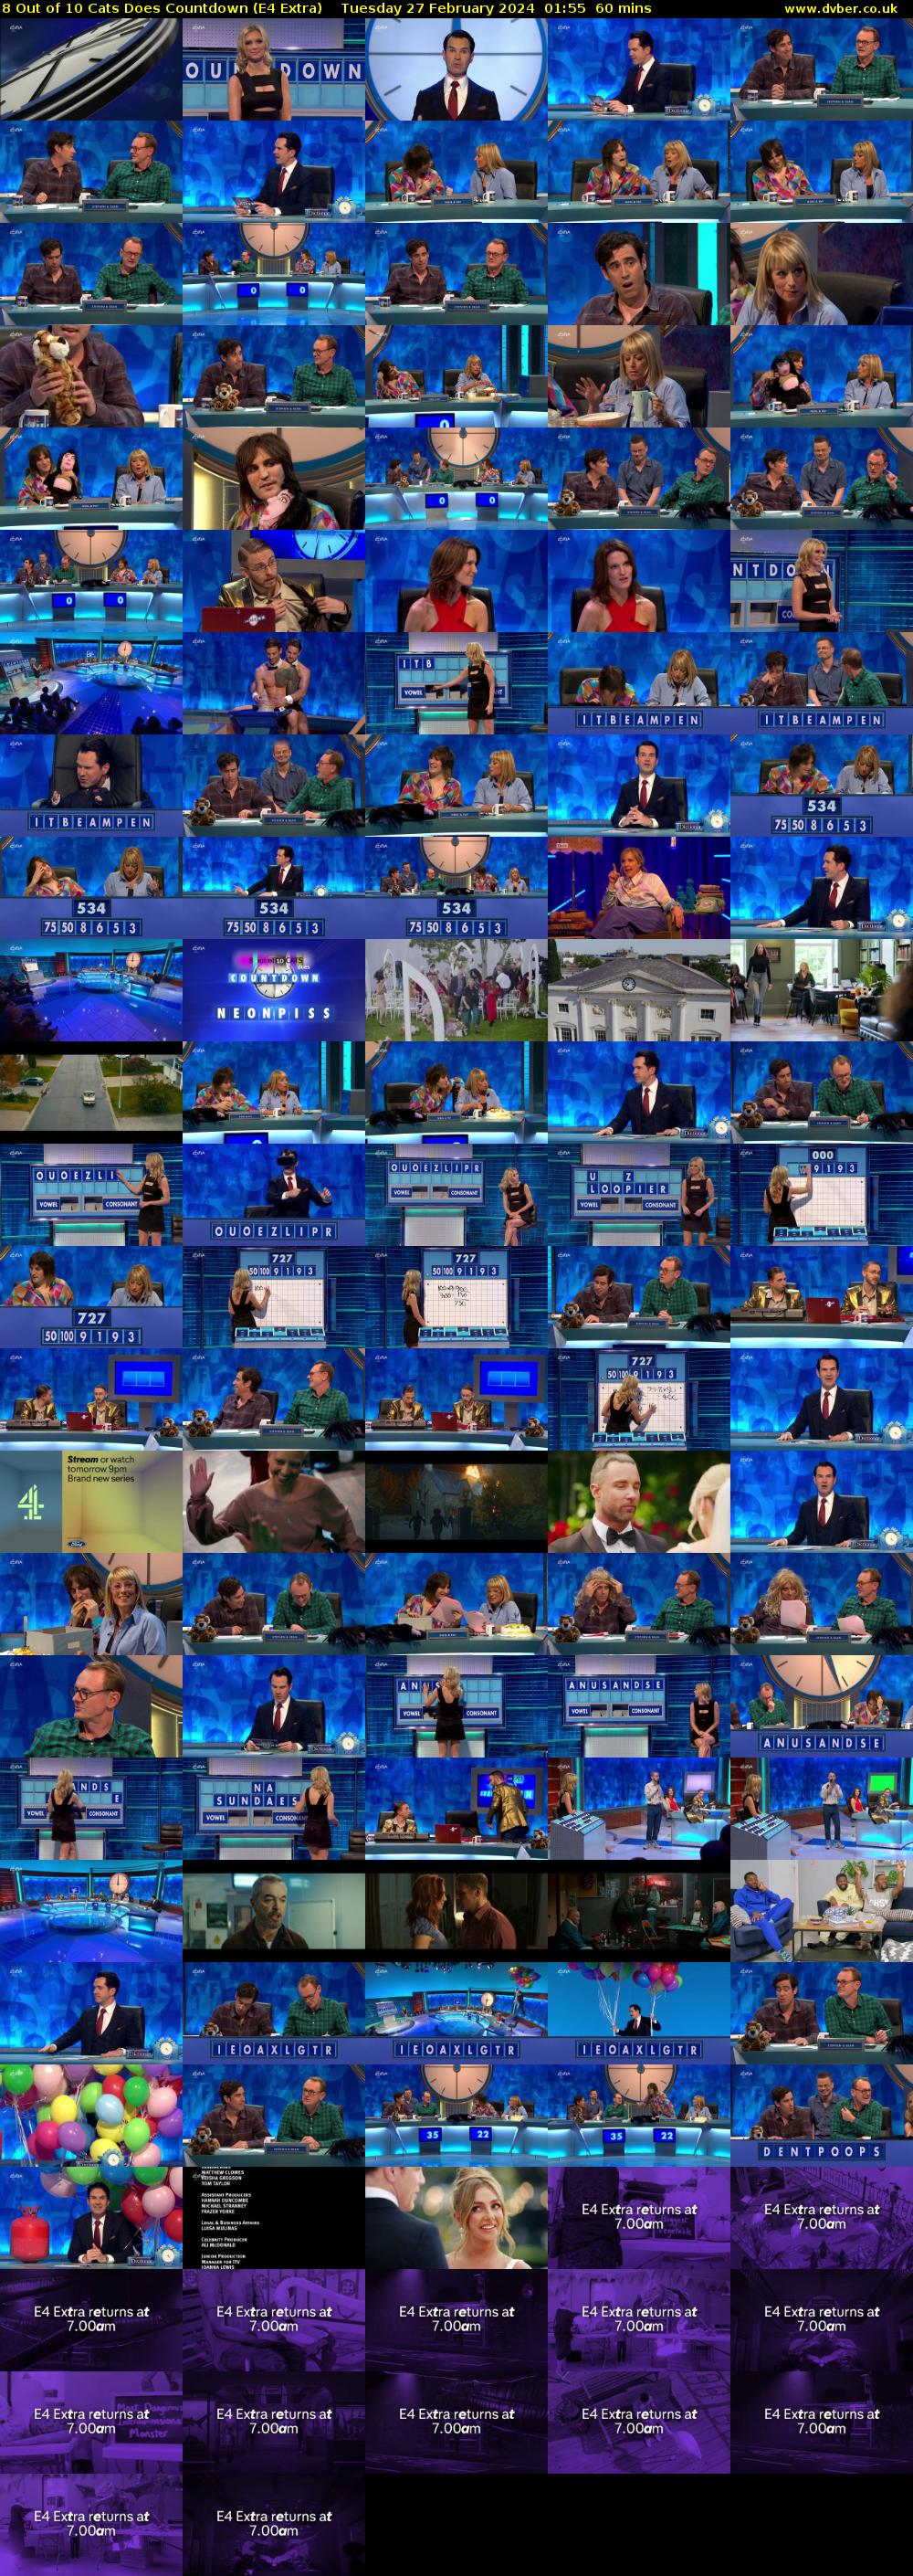 8 Out of 10 Cats Does Countdown (E4 Extra) Tuesday 27 February 2024 01:55 - 02:55